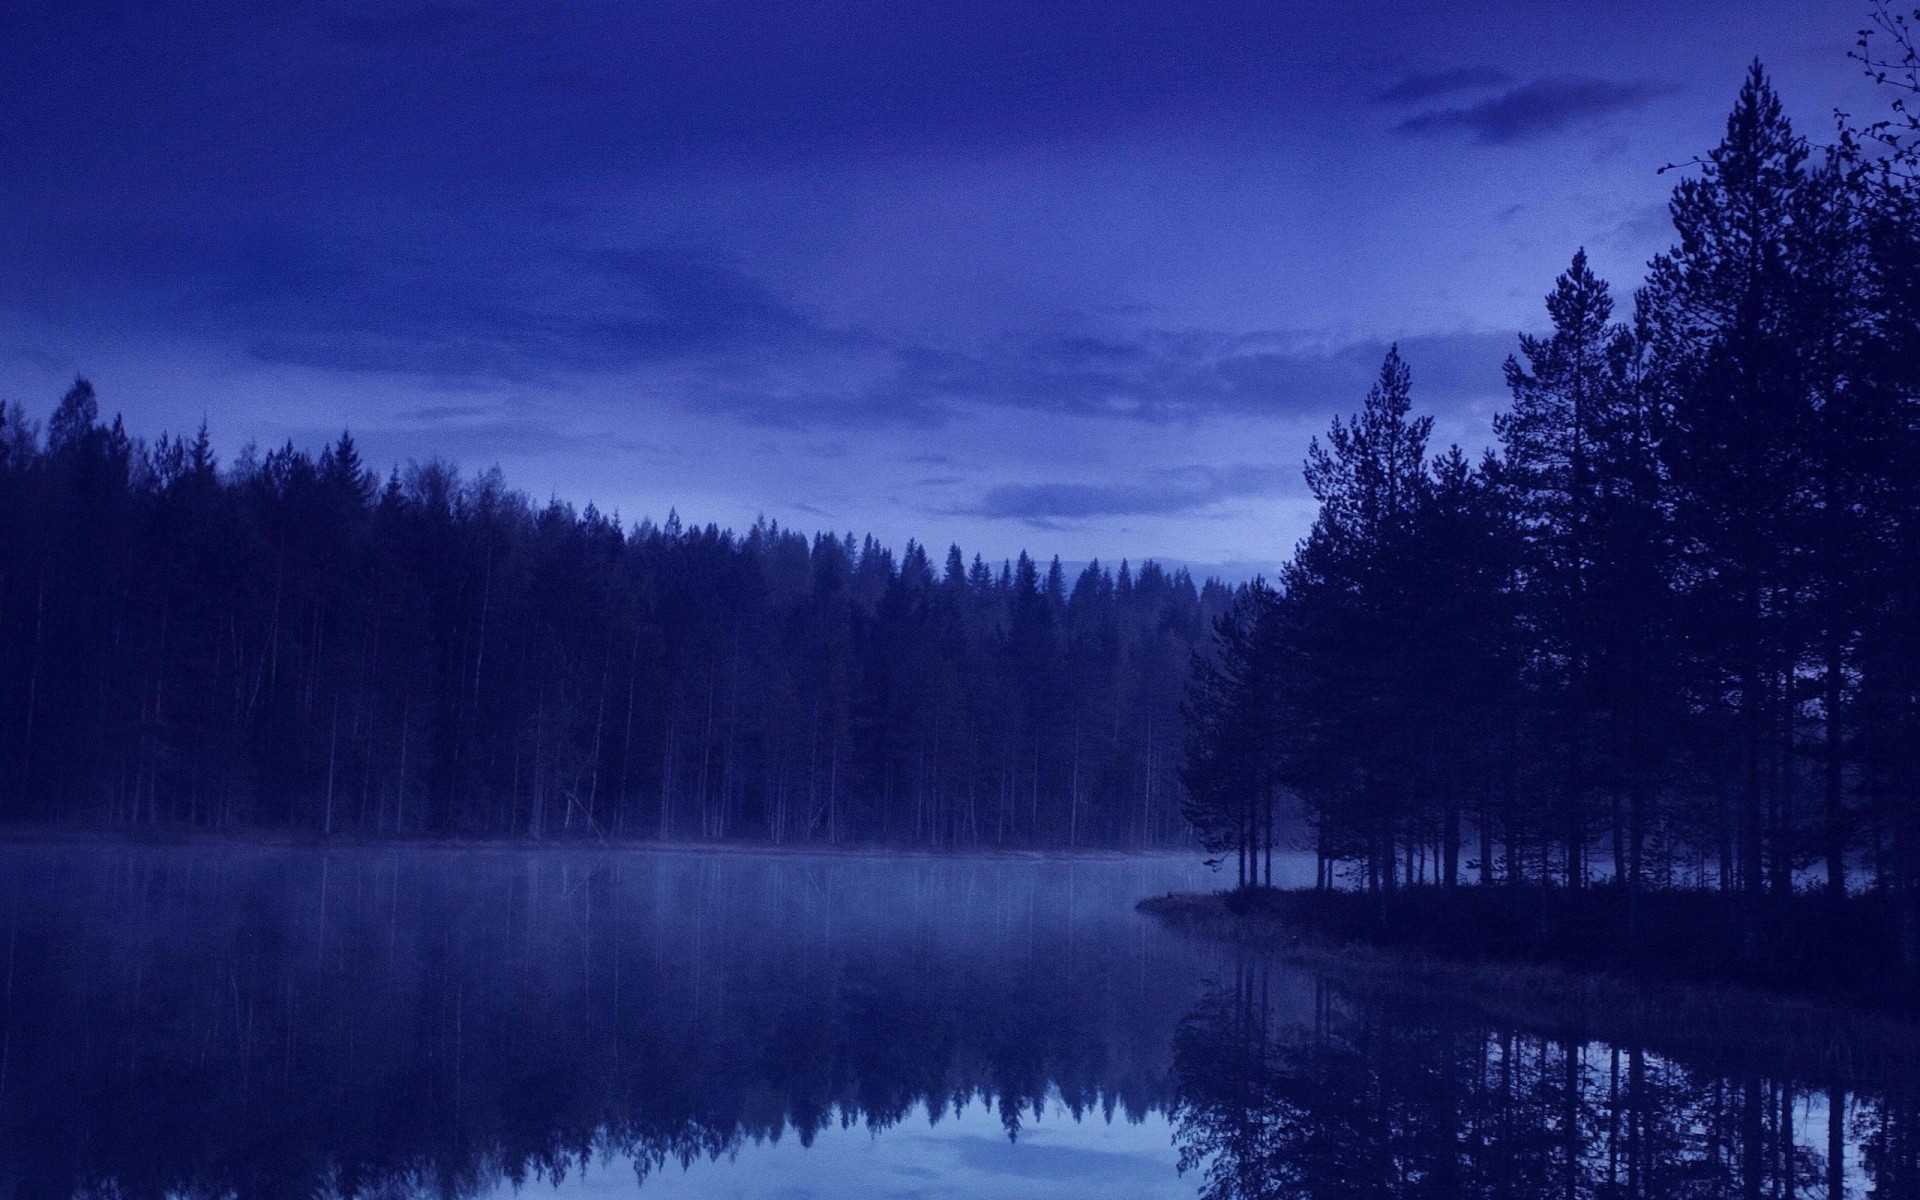 General 1920x1200 creeks nature landscape blue evening reflection water forest trees pine trees calm island